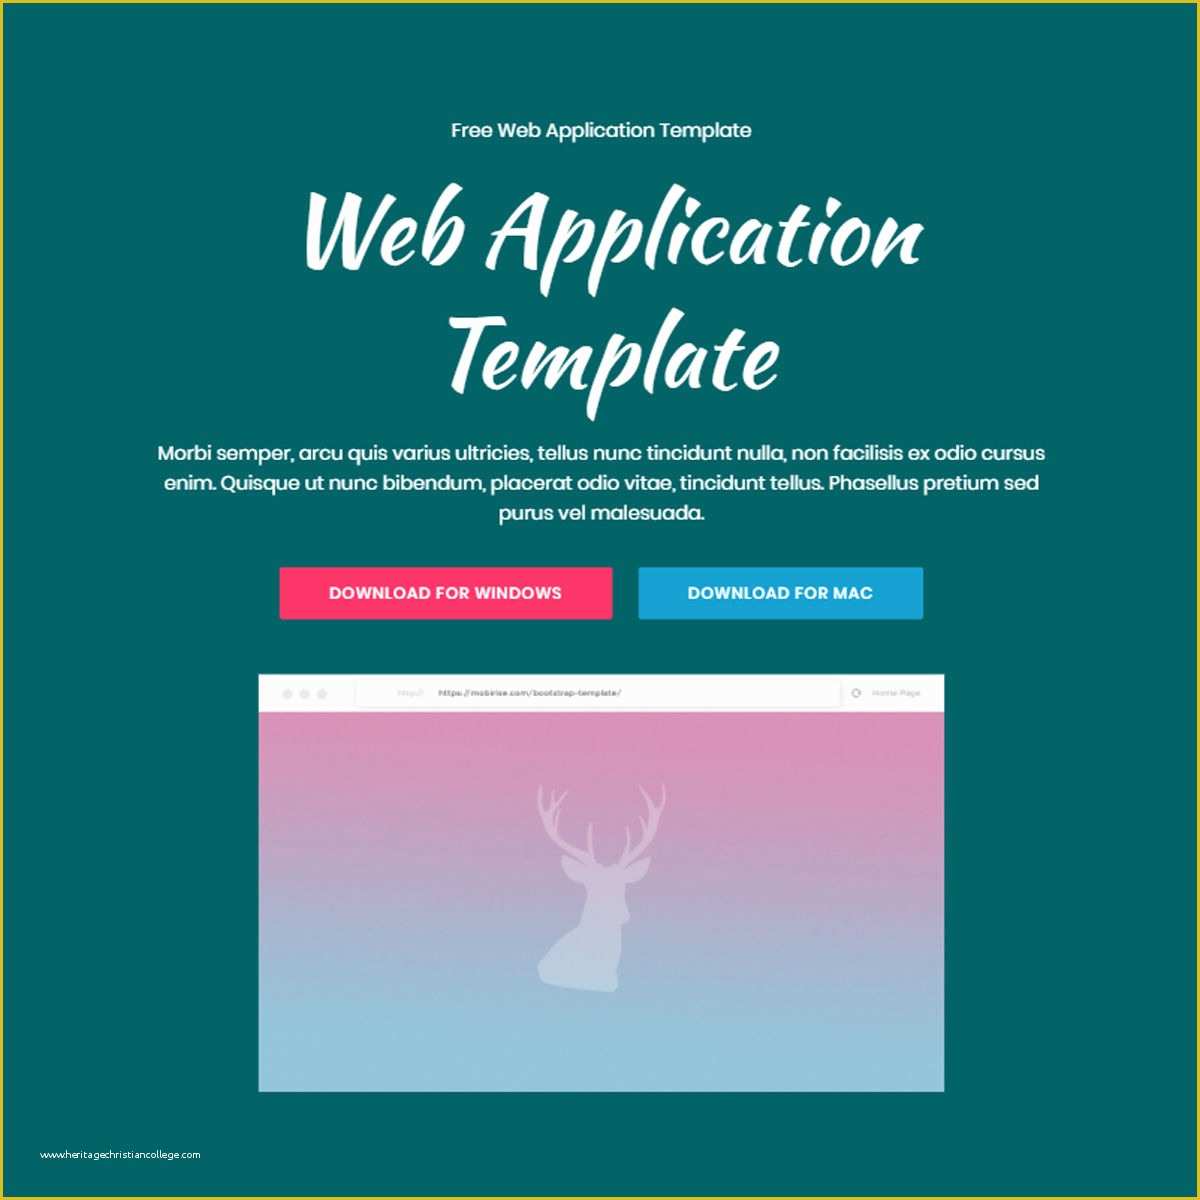 Bootstrap Web Application Template Free Of Free Bootstrap 4 Template 2019